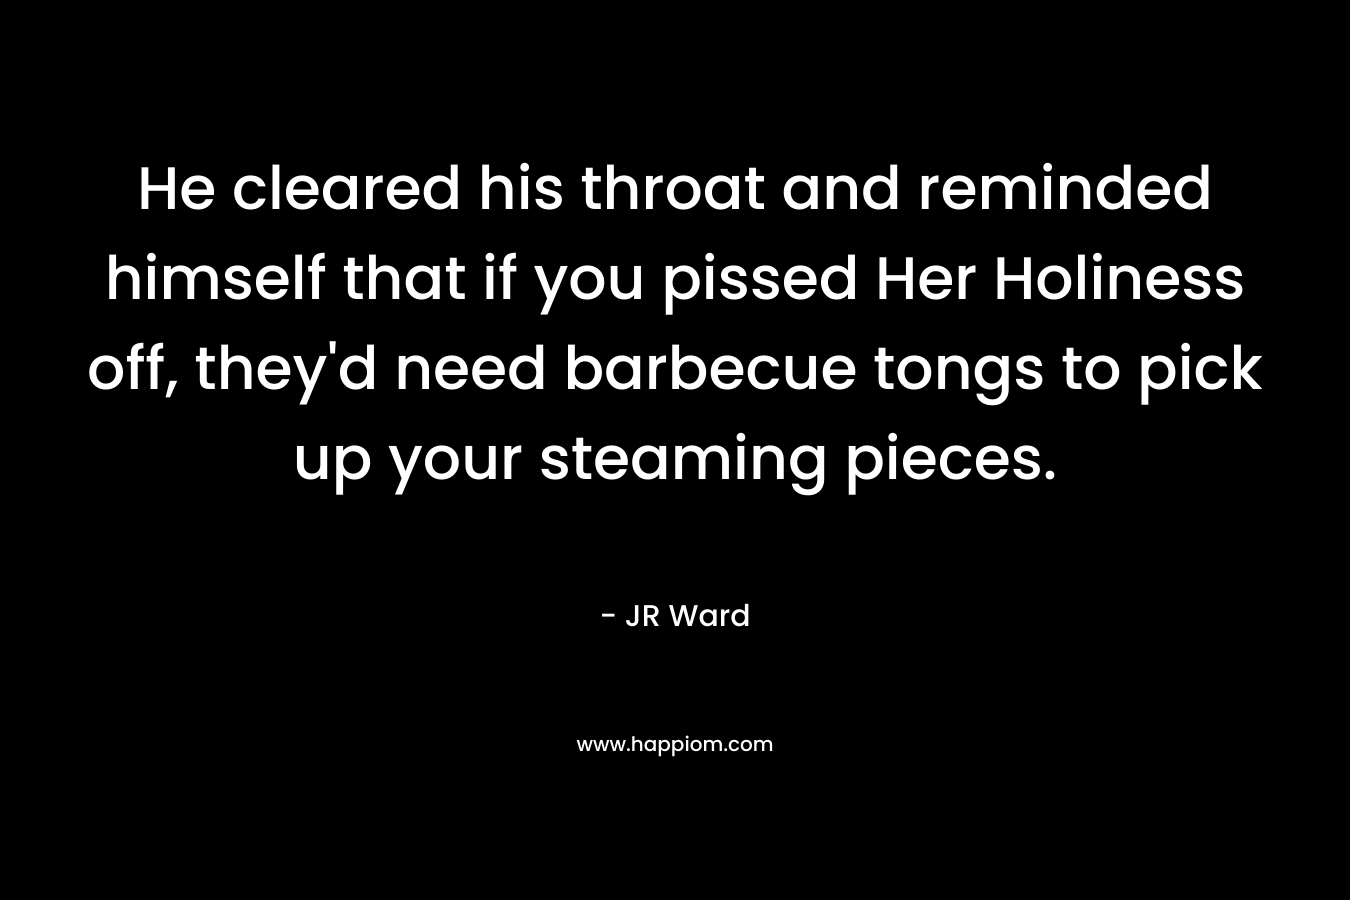 He cleared his throat and reminded himself that if you pissed Her Holiness off, they’d need barbecue tongs to pick up your steaming pieces. – JR Ward